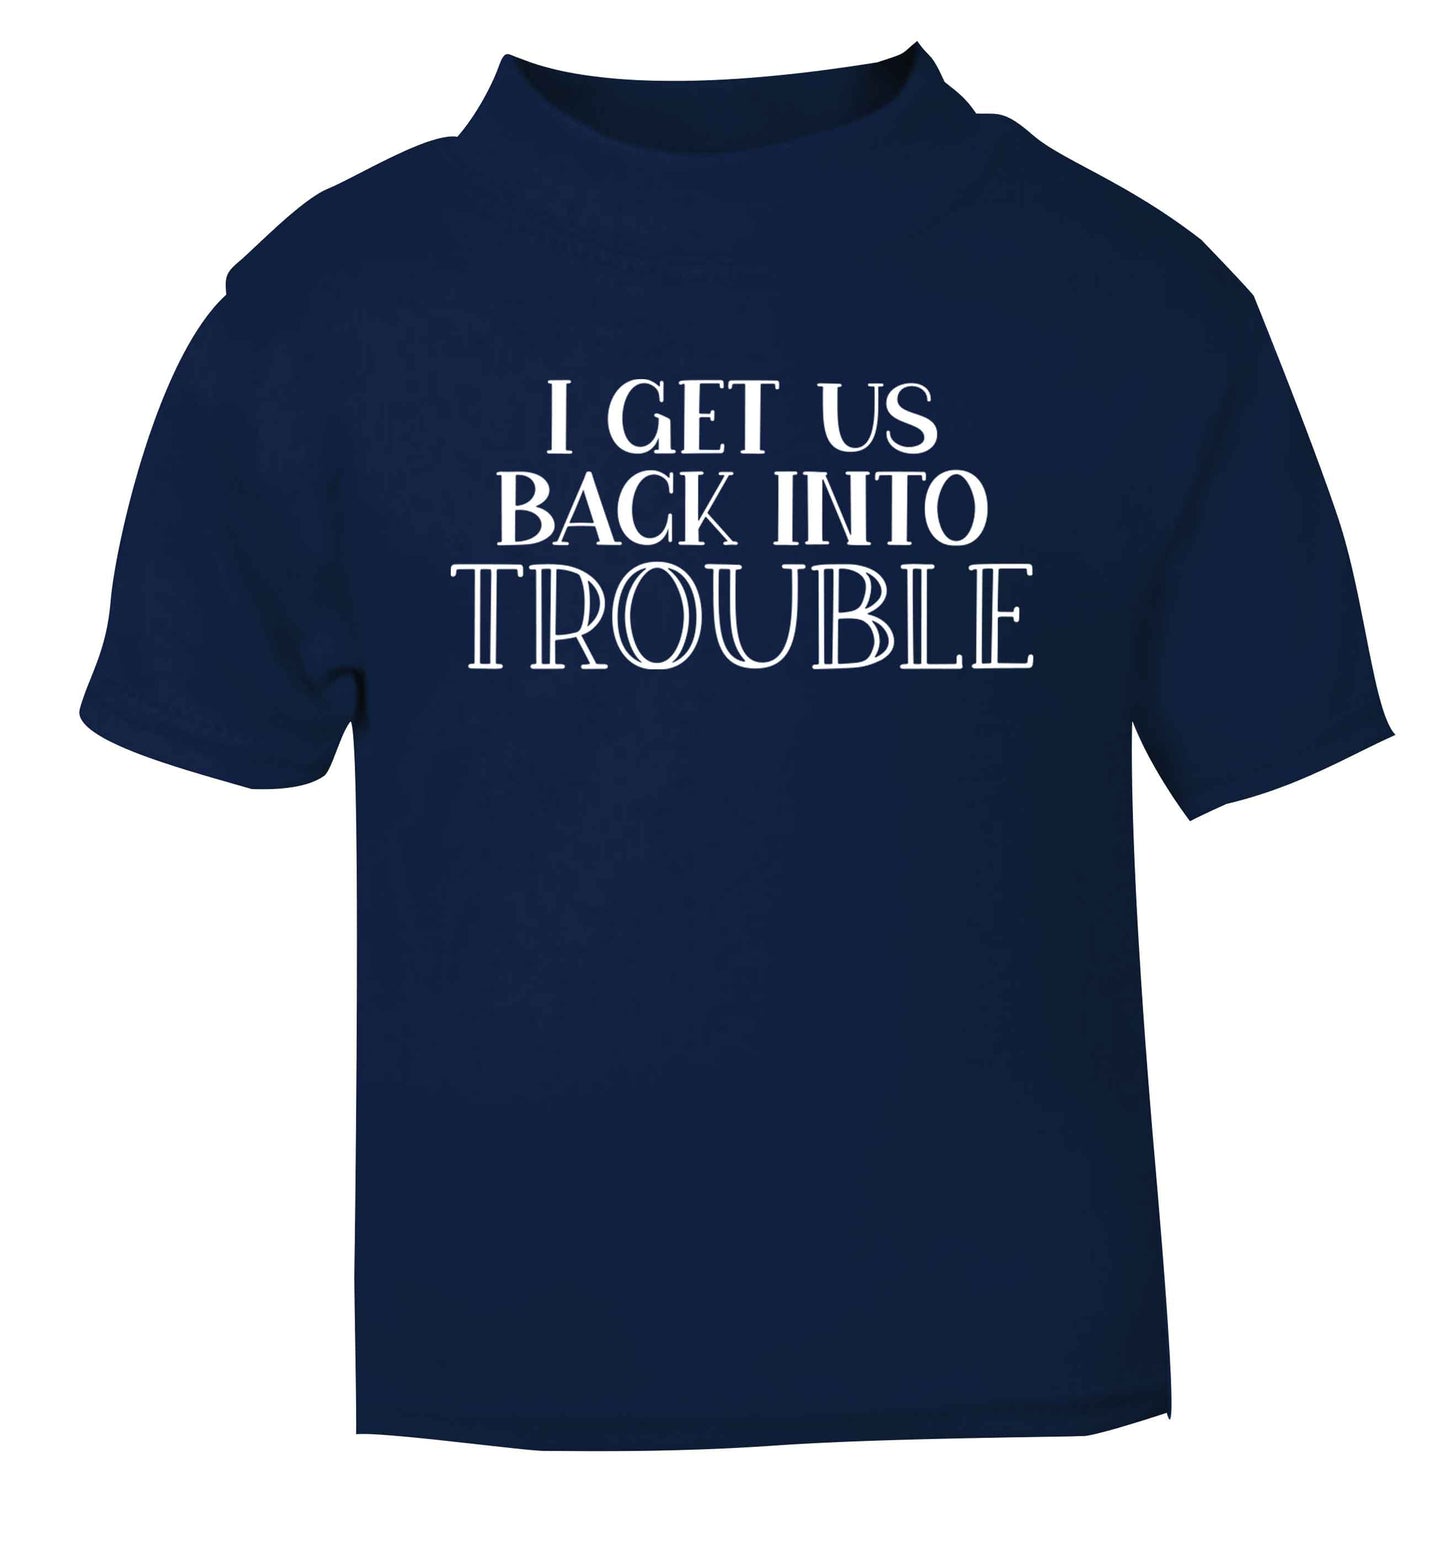 I get us back into trouble navy baby toddler Tshirt 2 Years